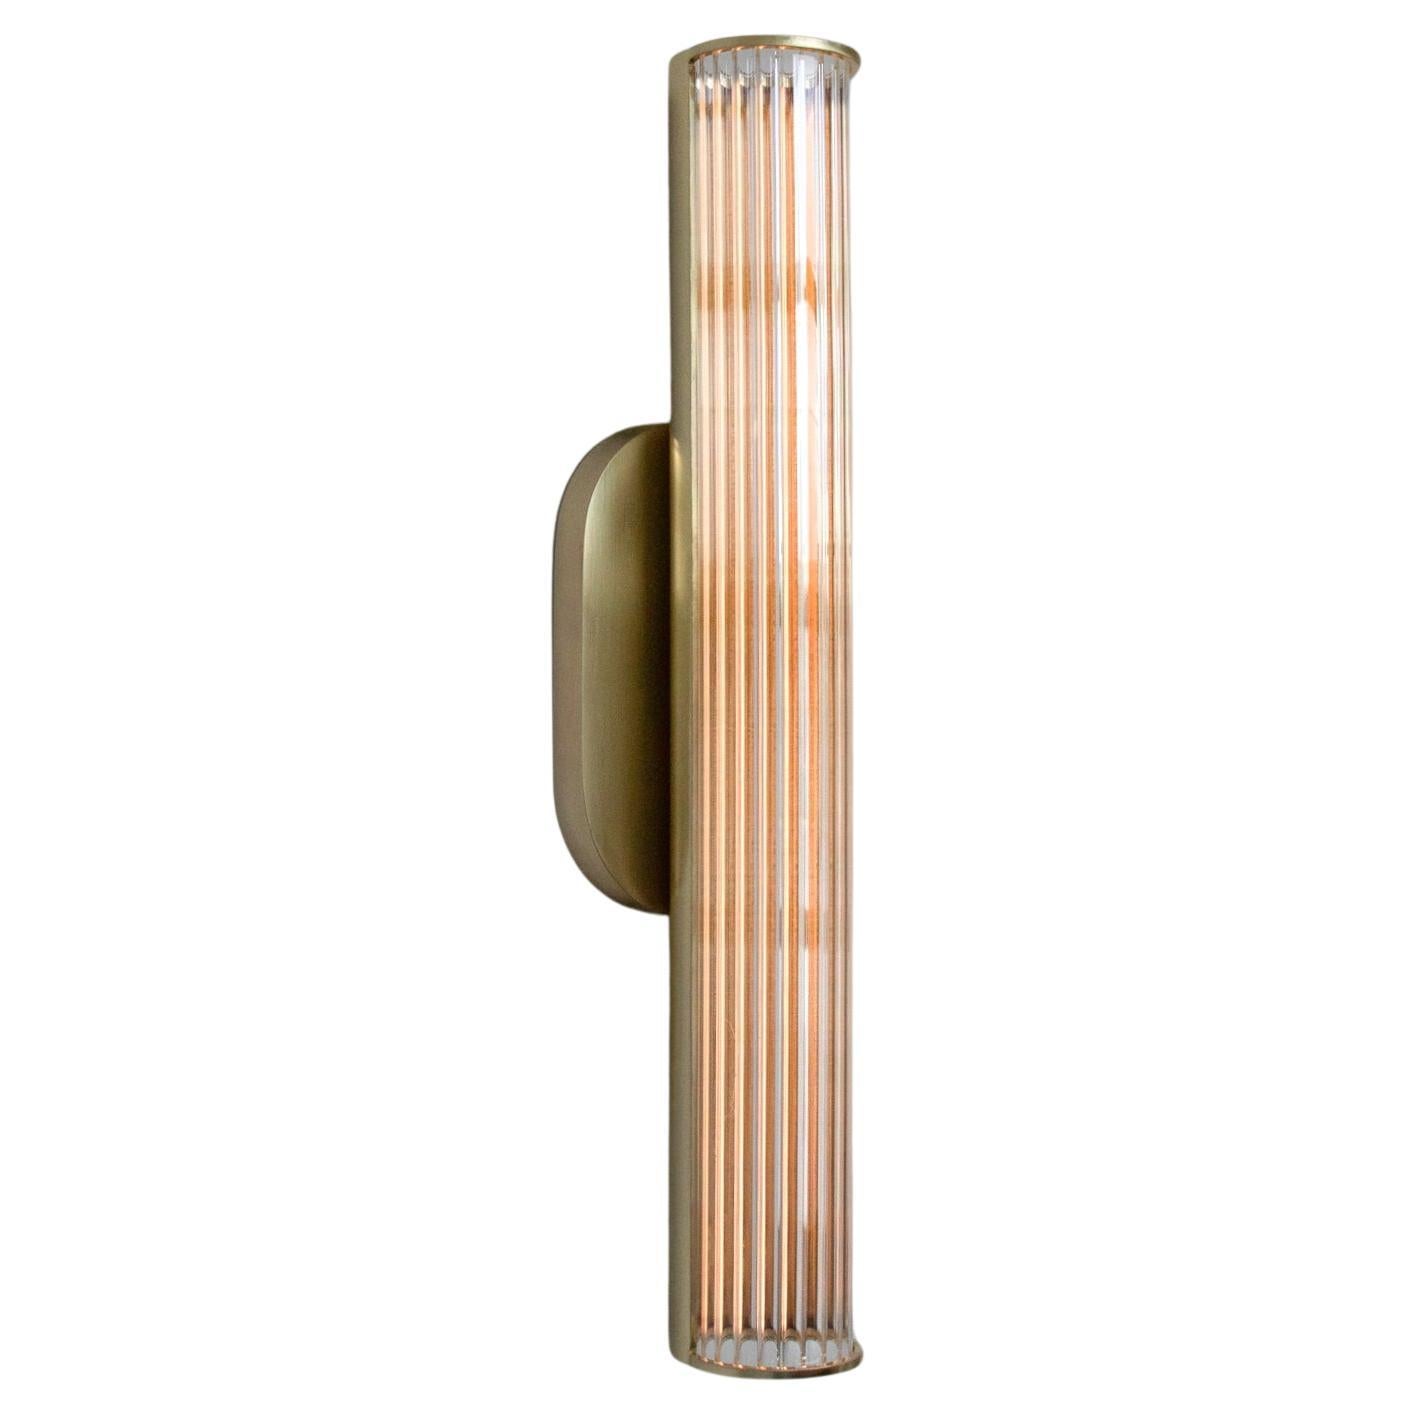 EMBER S2 Wall Sconce - 24 3/4 inch - Clear Scalloped Glass - Satin Brass For Sale